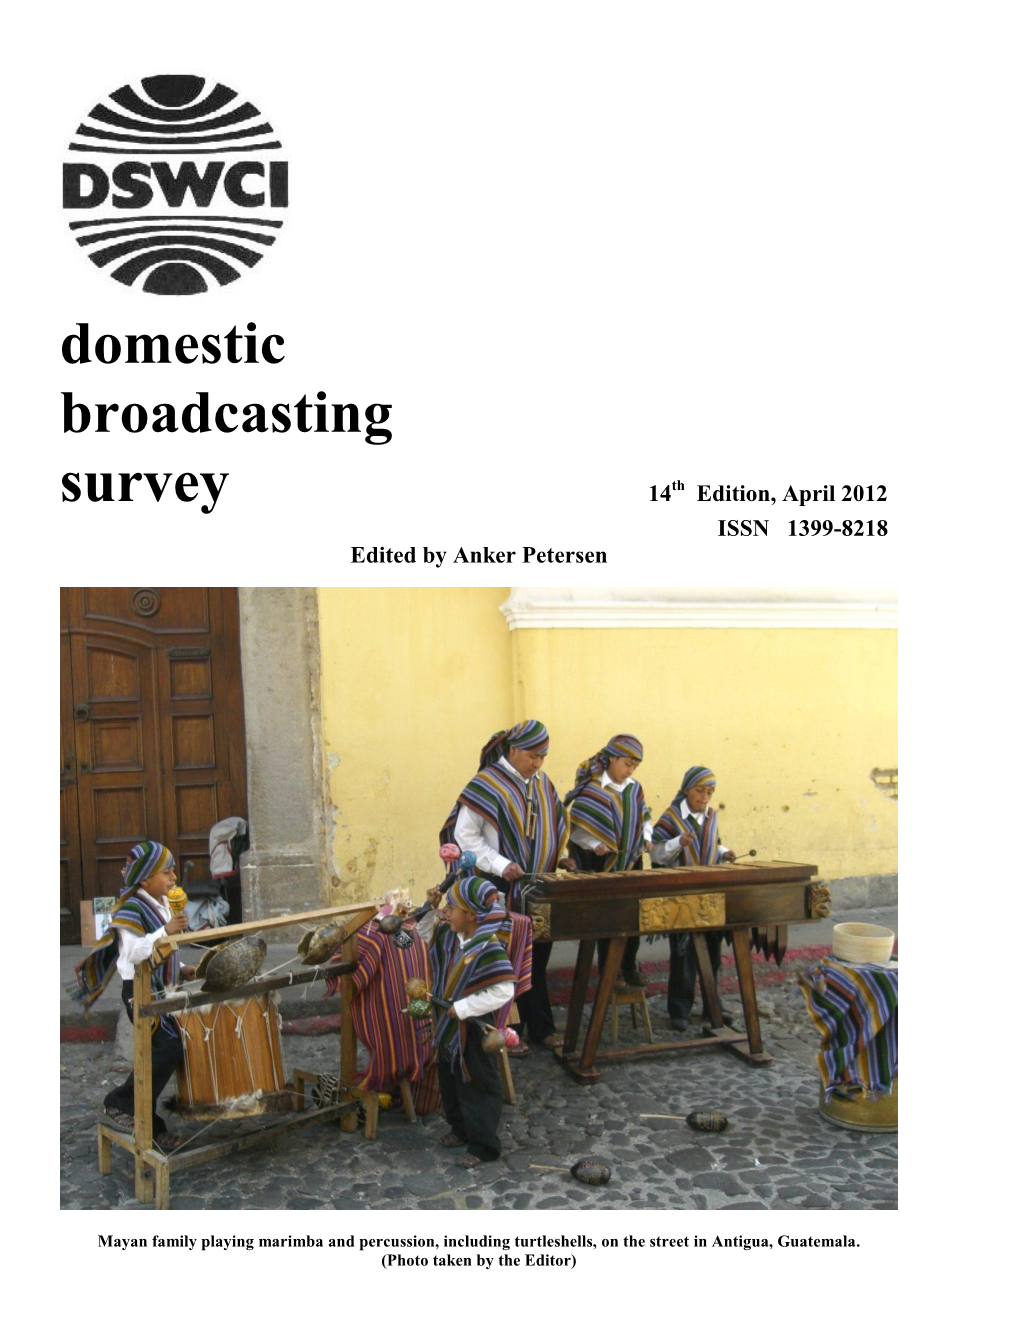 Domestic Broadcasting Survey 14Th Edition, April 2012 ISSN 1399-8218 Edited by Anker Petersen